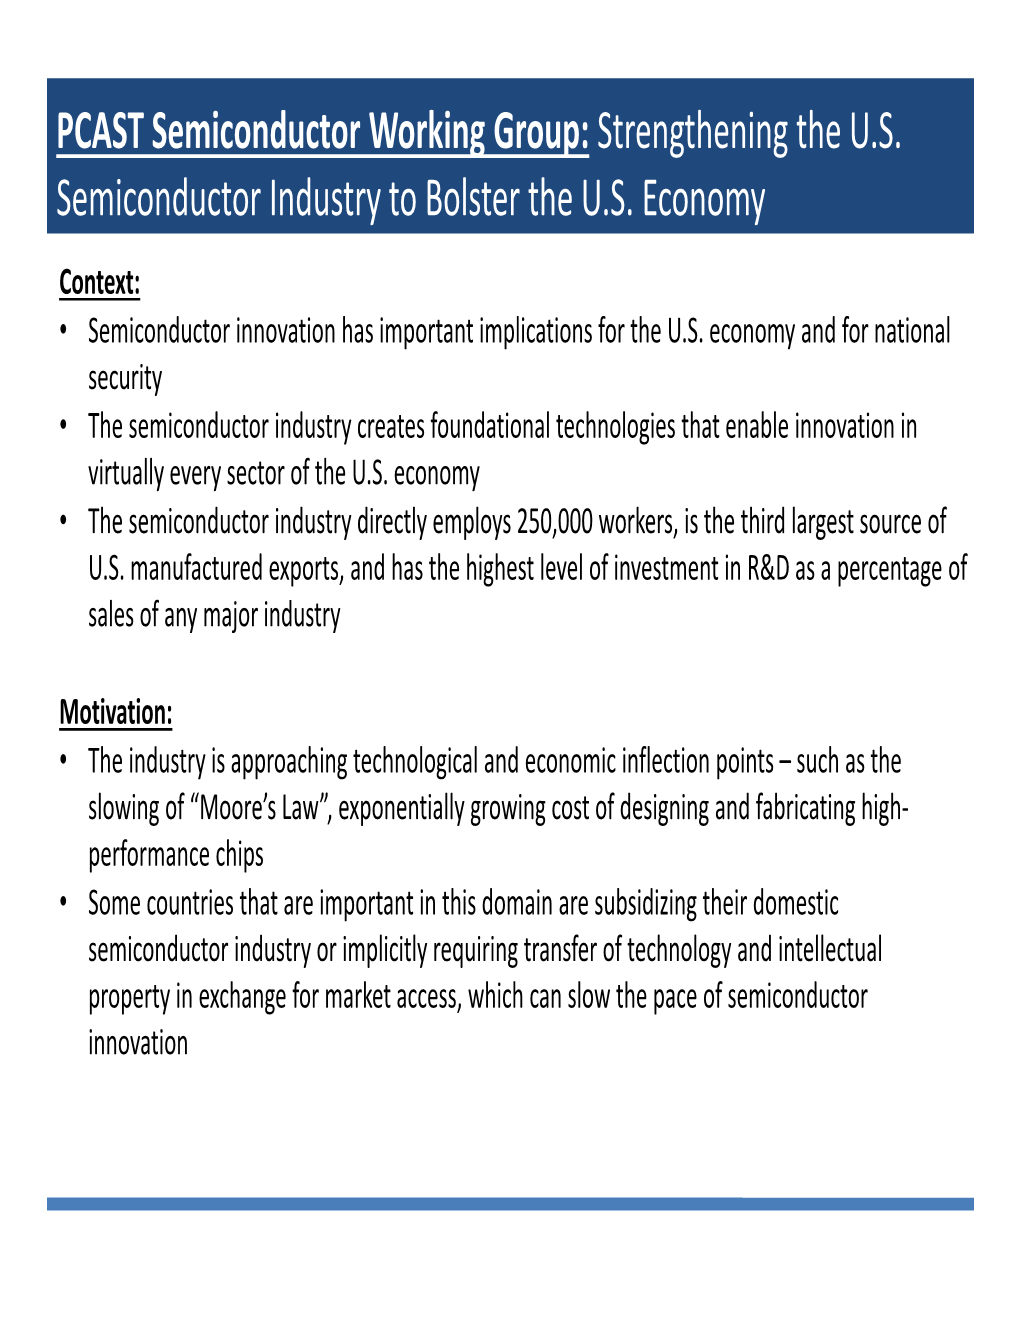 PCAST Semiconductor Working Group: Strengthening the U.S